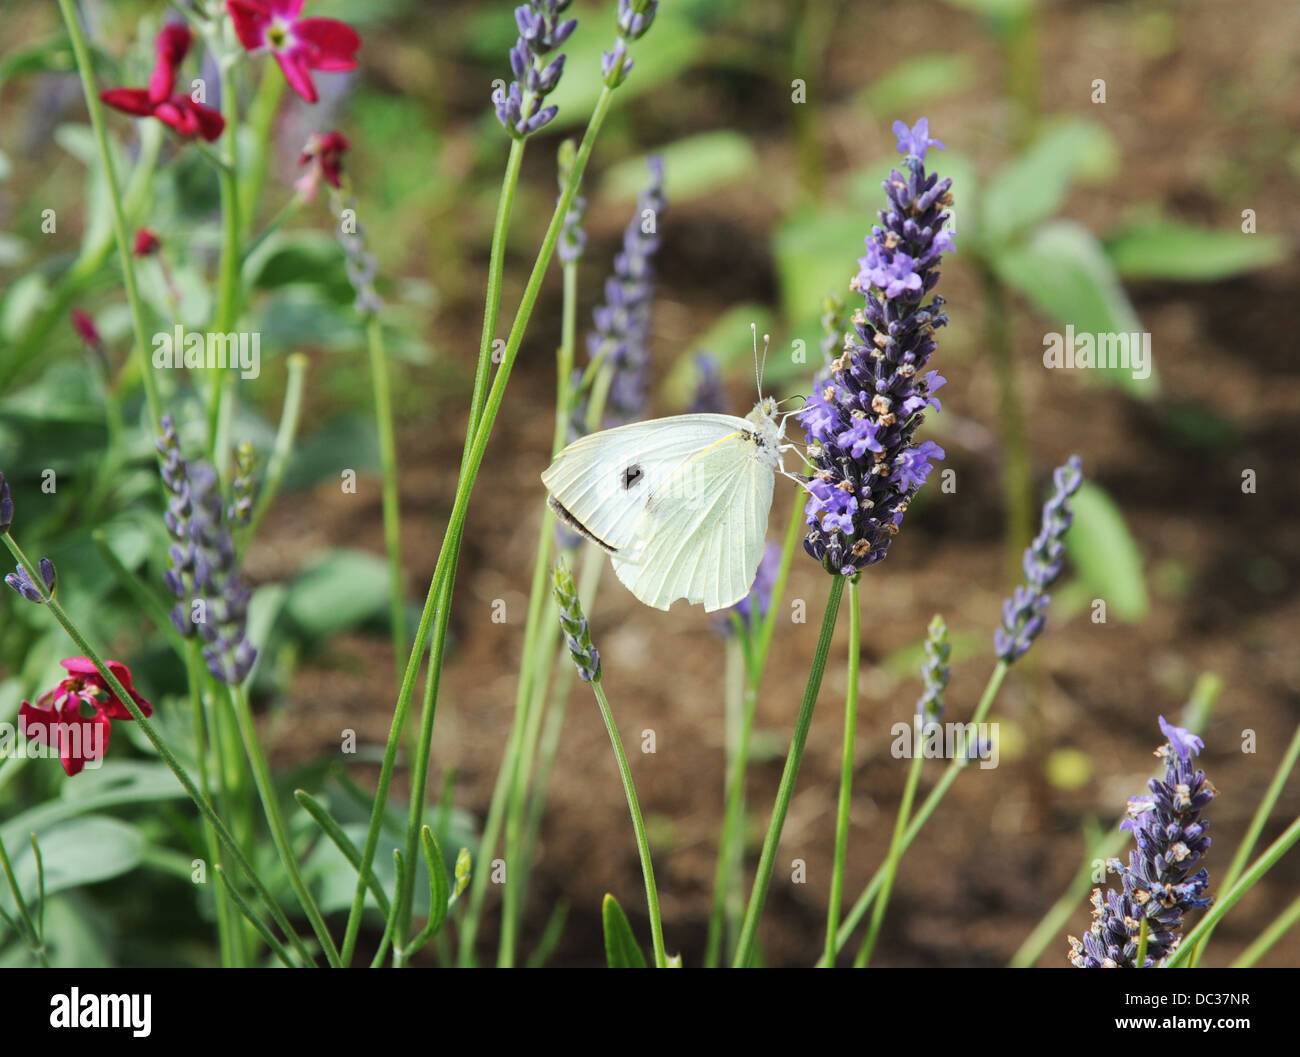 Large White butterfly on lavender flowers. Stock Photo